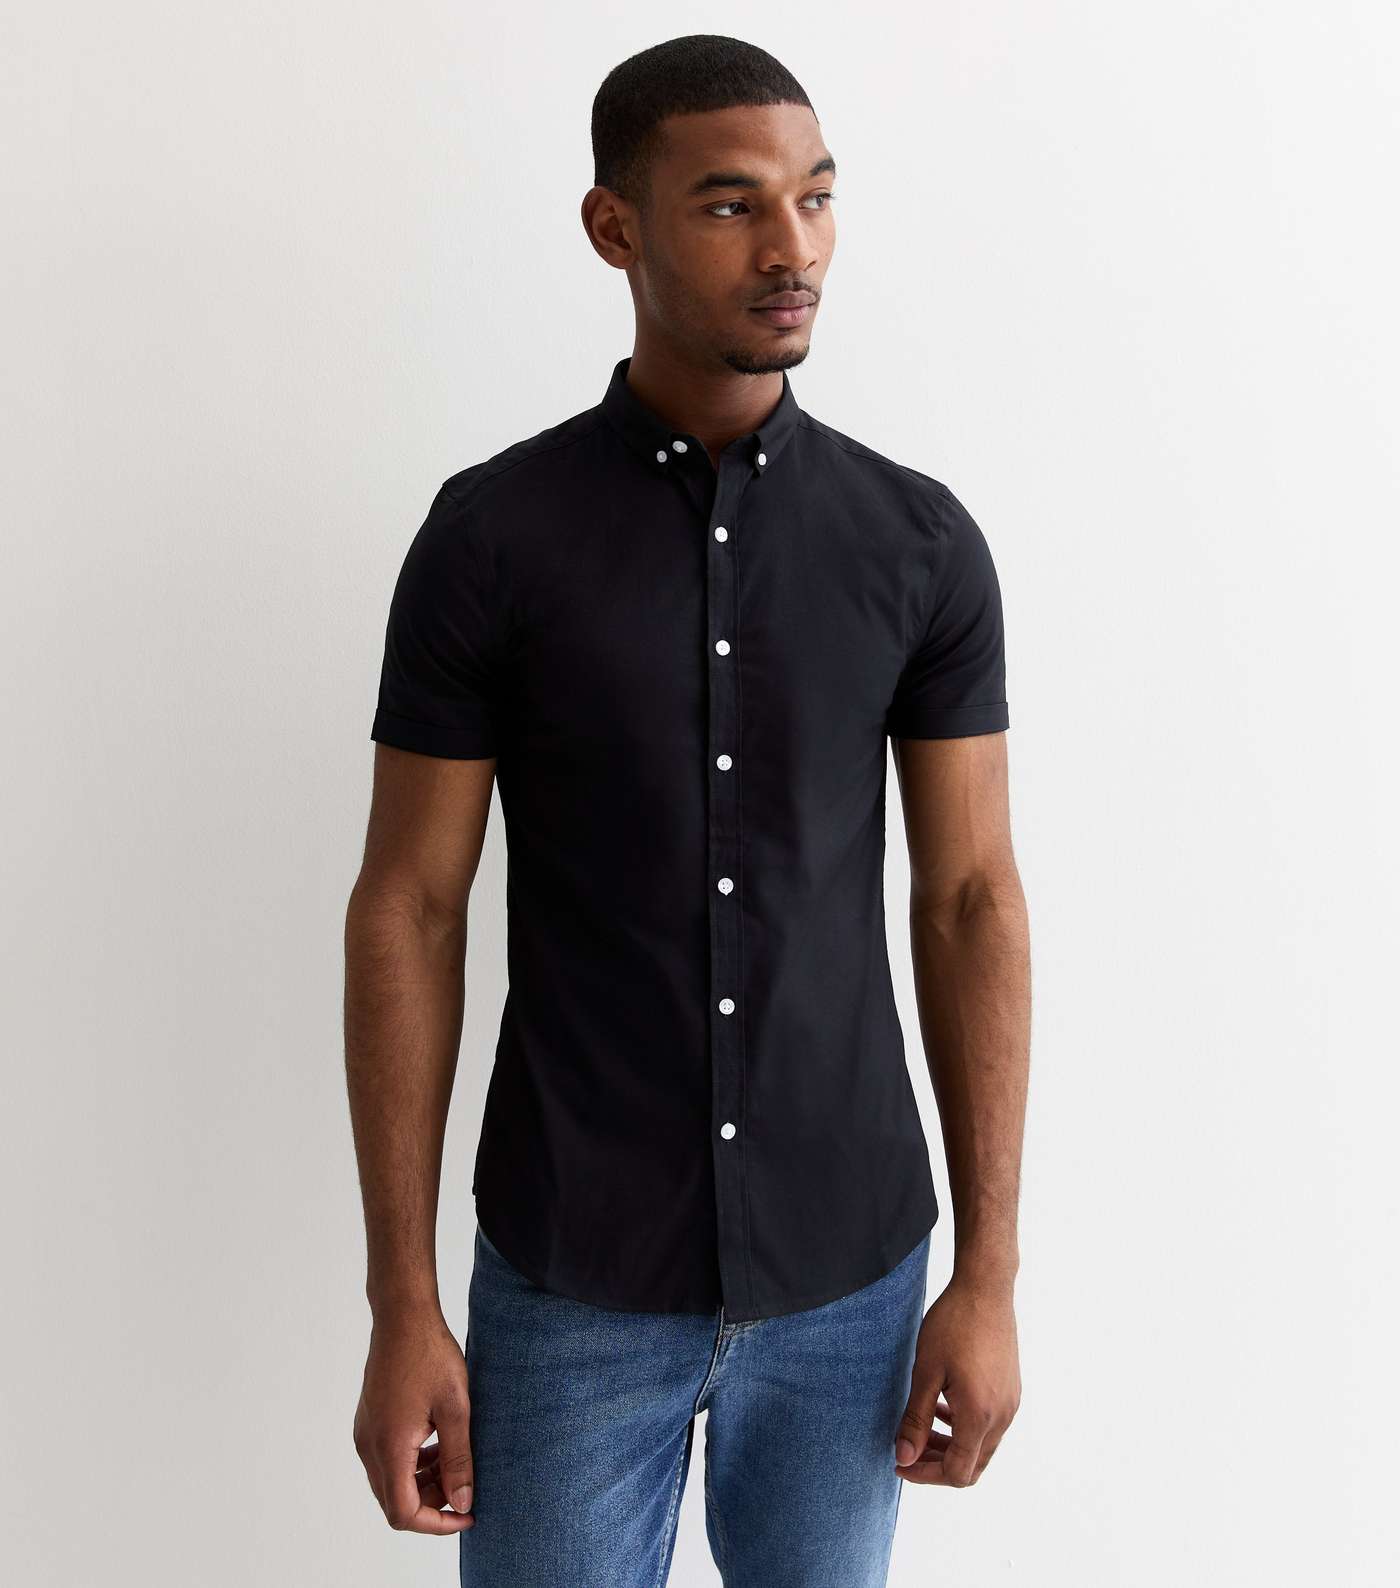 Black Short Sleeve Muscle Fit Oxford Shirt Image 2